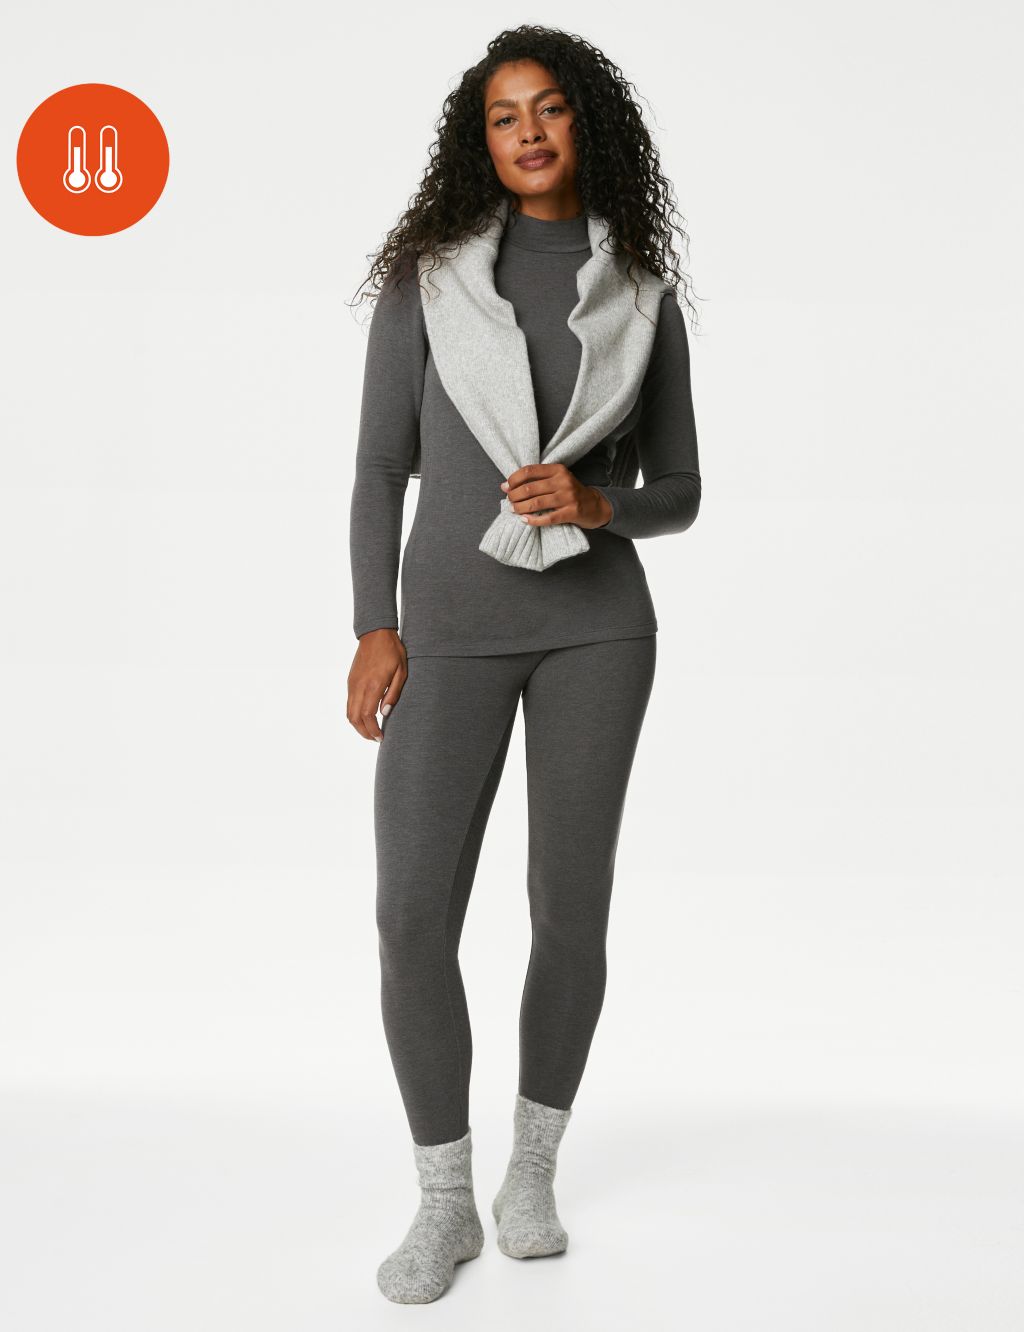 Buy Elements Outdoor Fleece Lined Warm Handle Leggings from the Laura  Ashley online shop